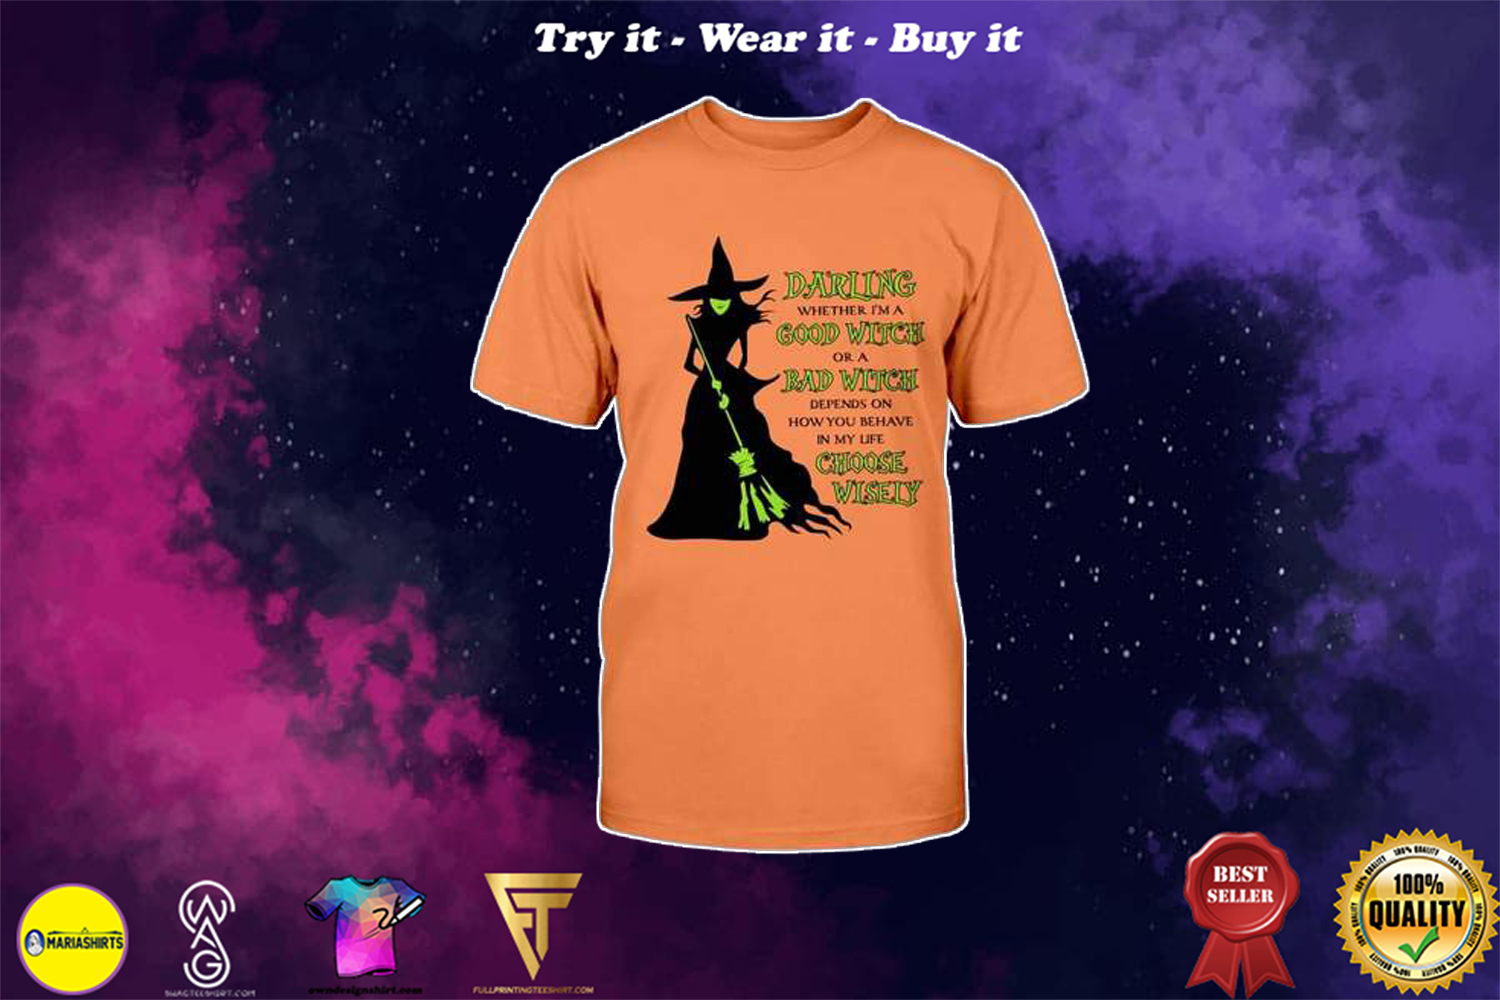 [special edition] halloween darling whether im a good witch or a bad witch choose wisely witch shirt – Maria